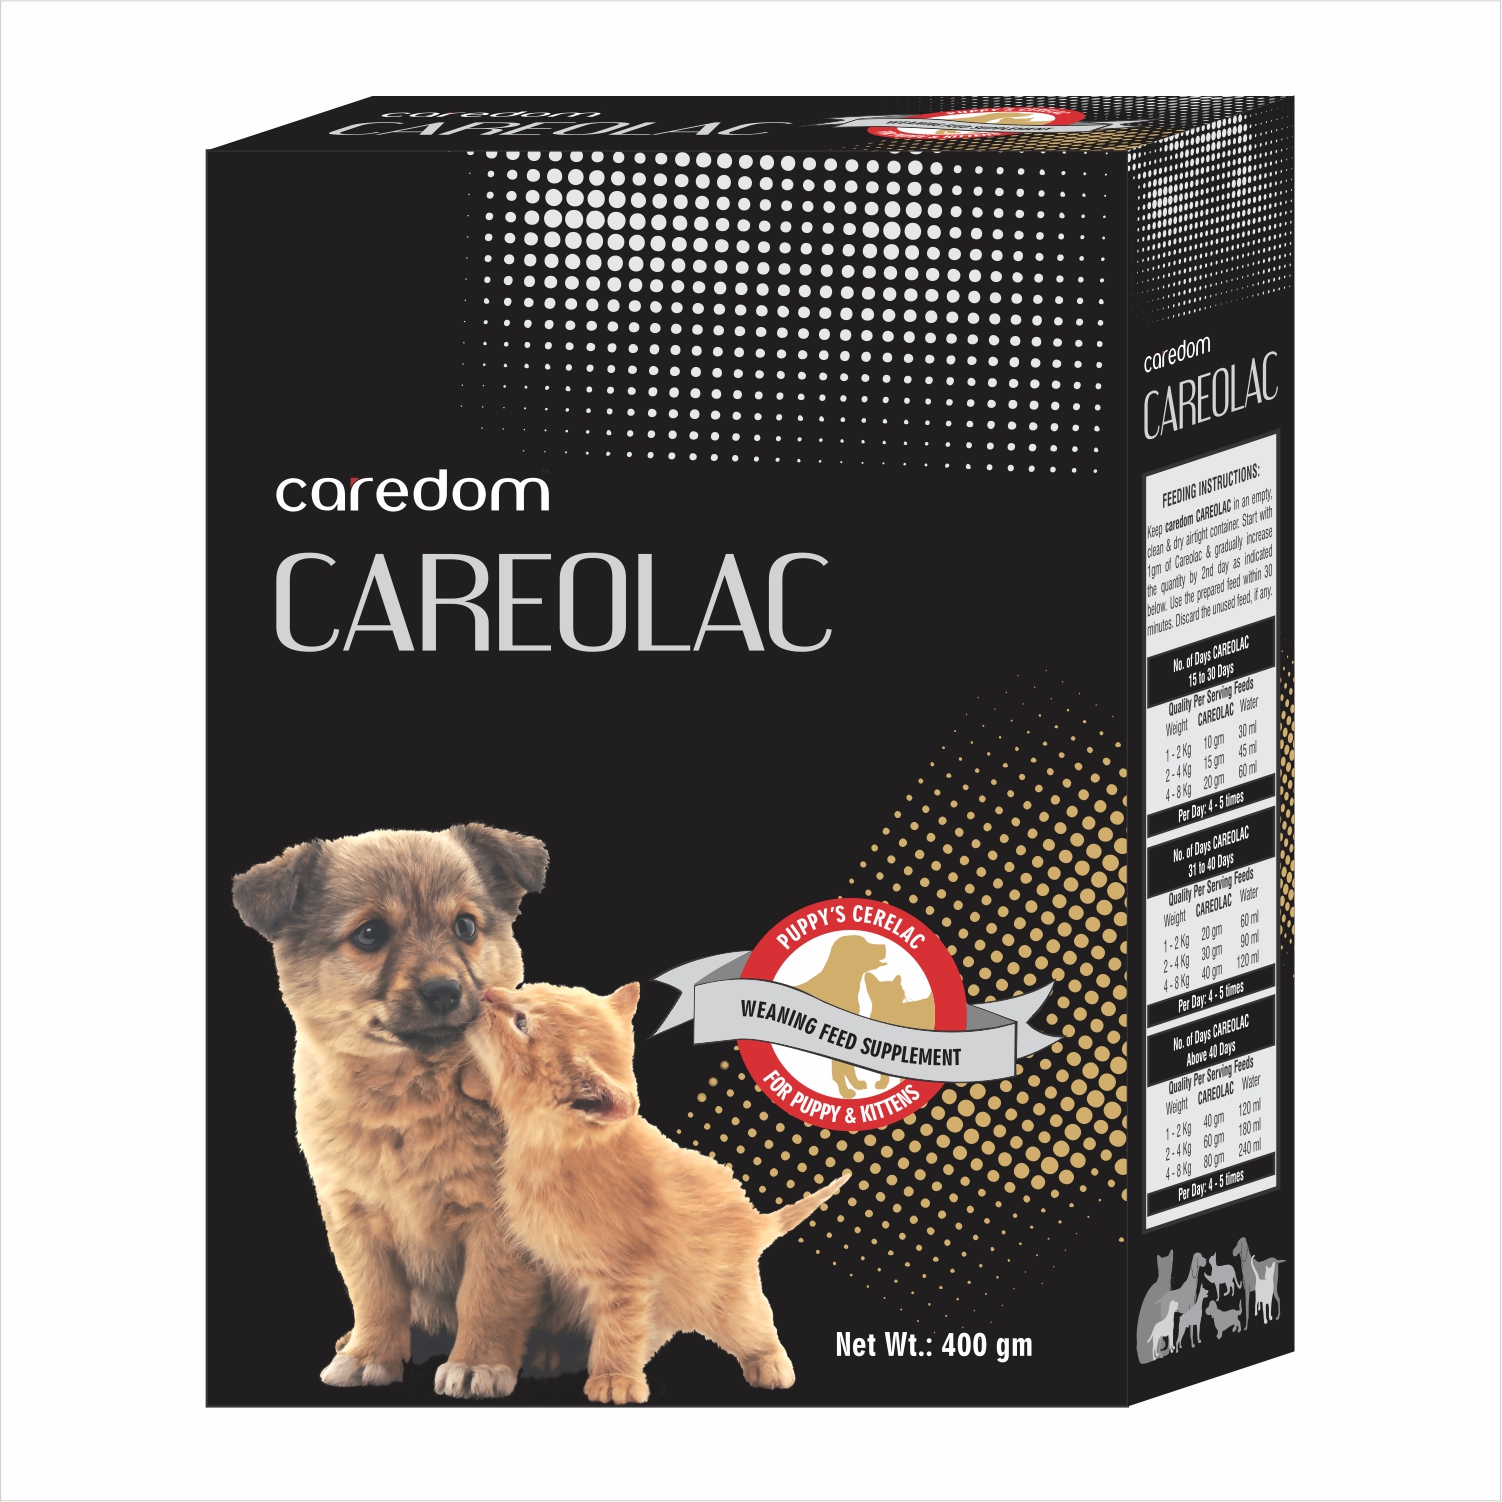 is cerelac good for puppies